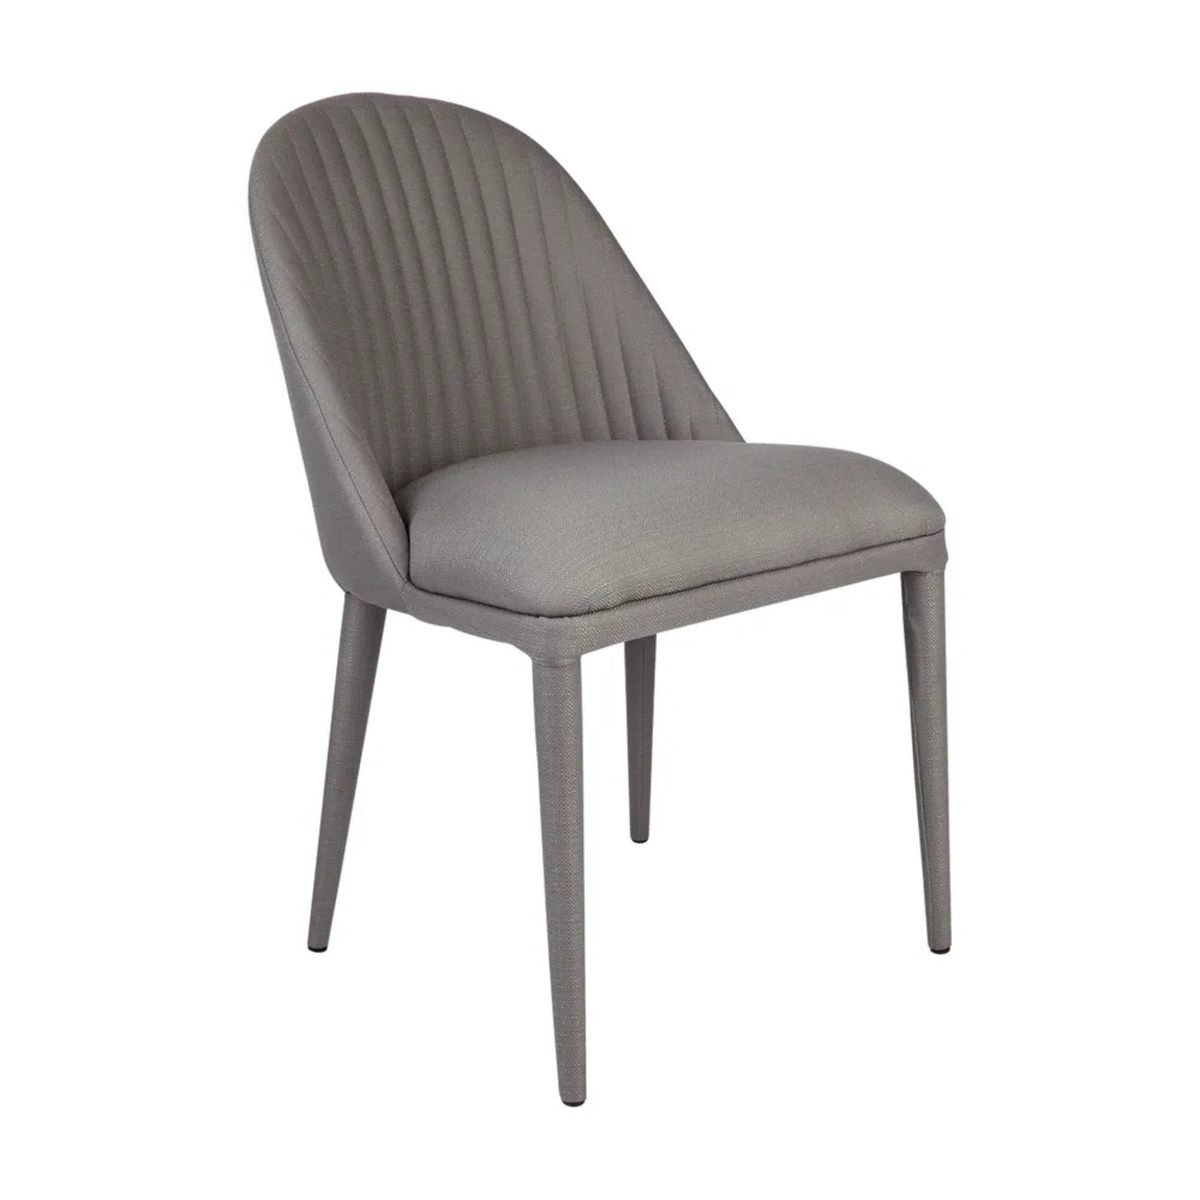 BAXTER UPHOLSTERED  DINING CHAIR - CHARCOAL